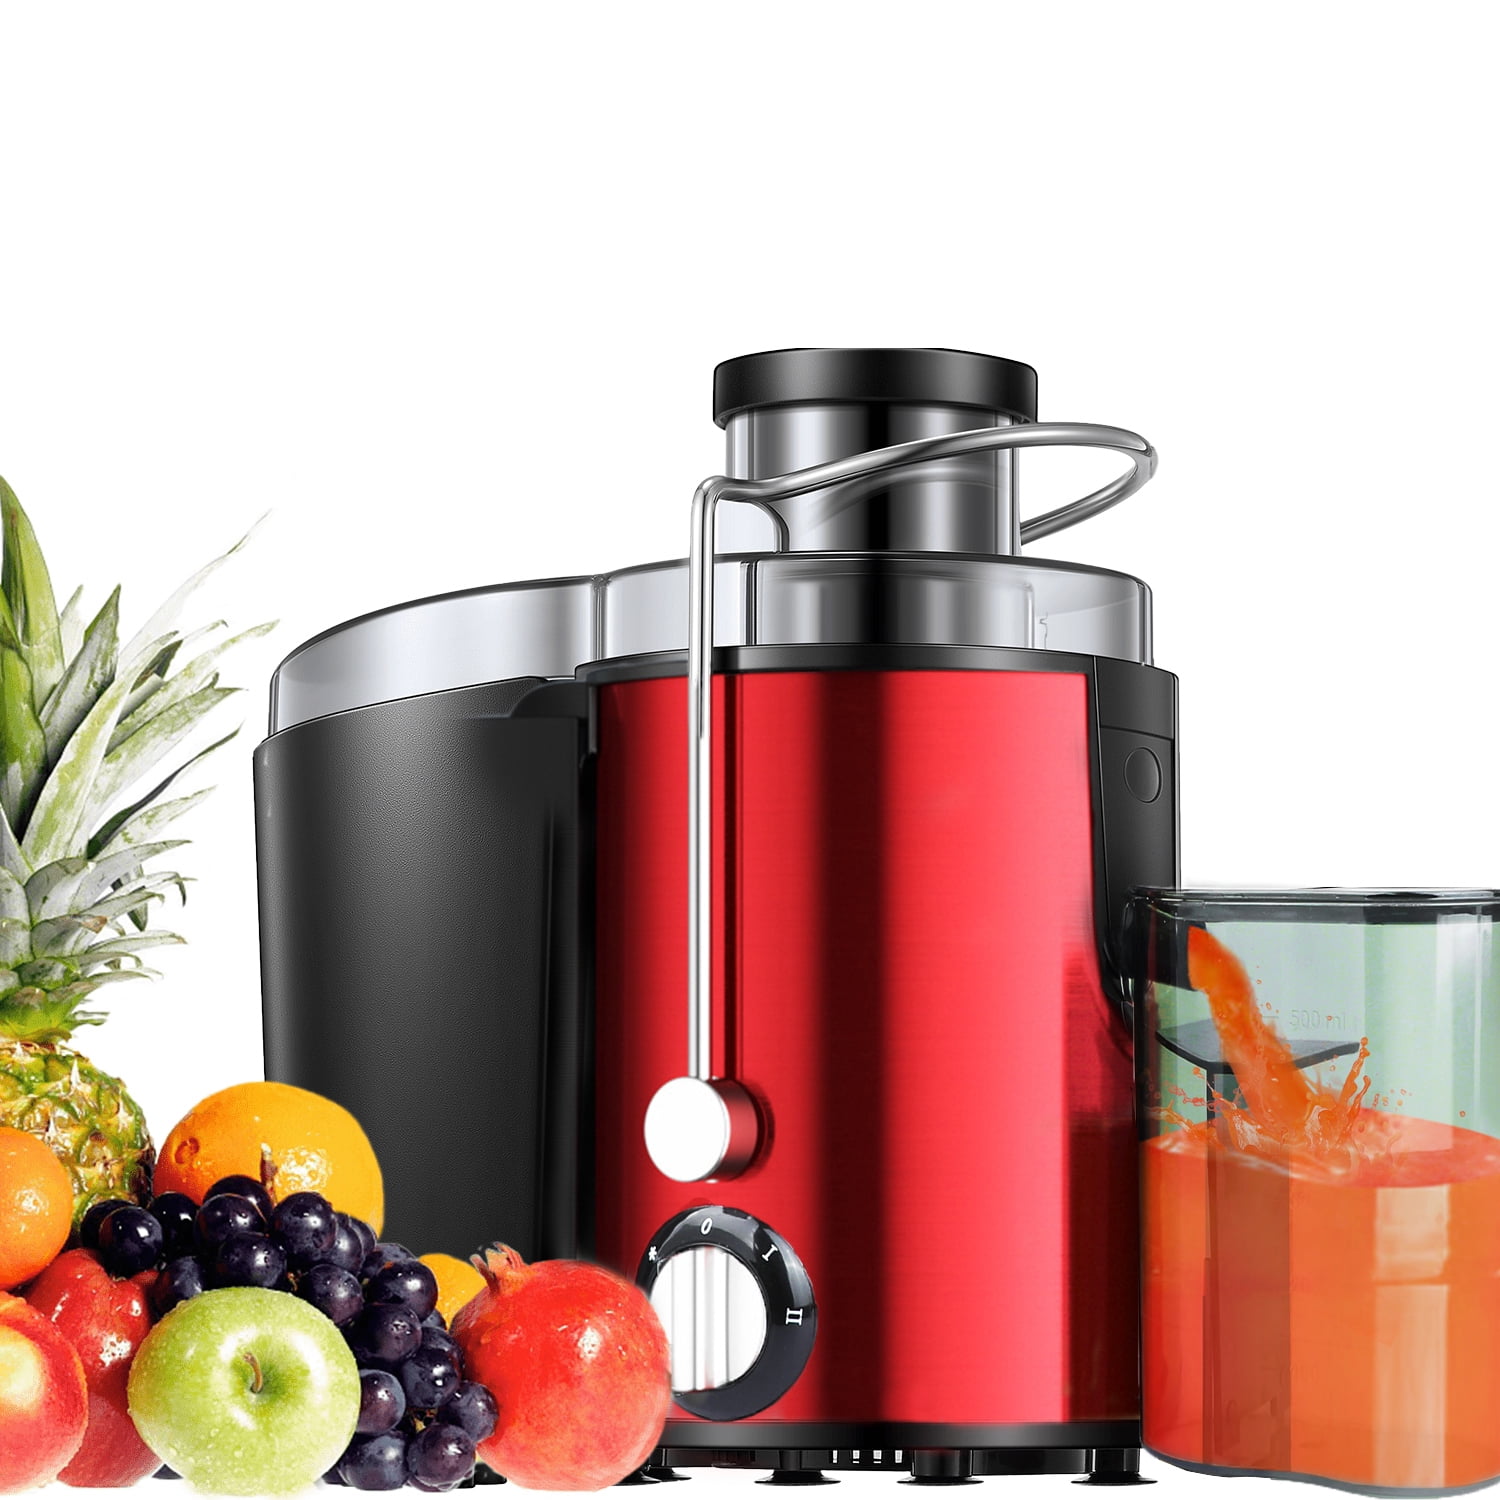 Red Centrifugal Juicer Machine With Pulp Separation, 400w Powerful Motor,  65mm Wide Mouth For Fruits & Vegetables, 500ml Juice Cup With Foam  Separator For Optimized Taste, Micro Switch And Copper Power Cord